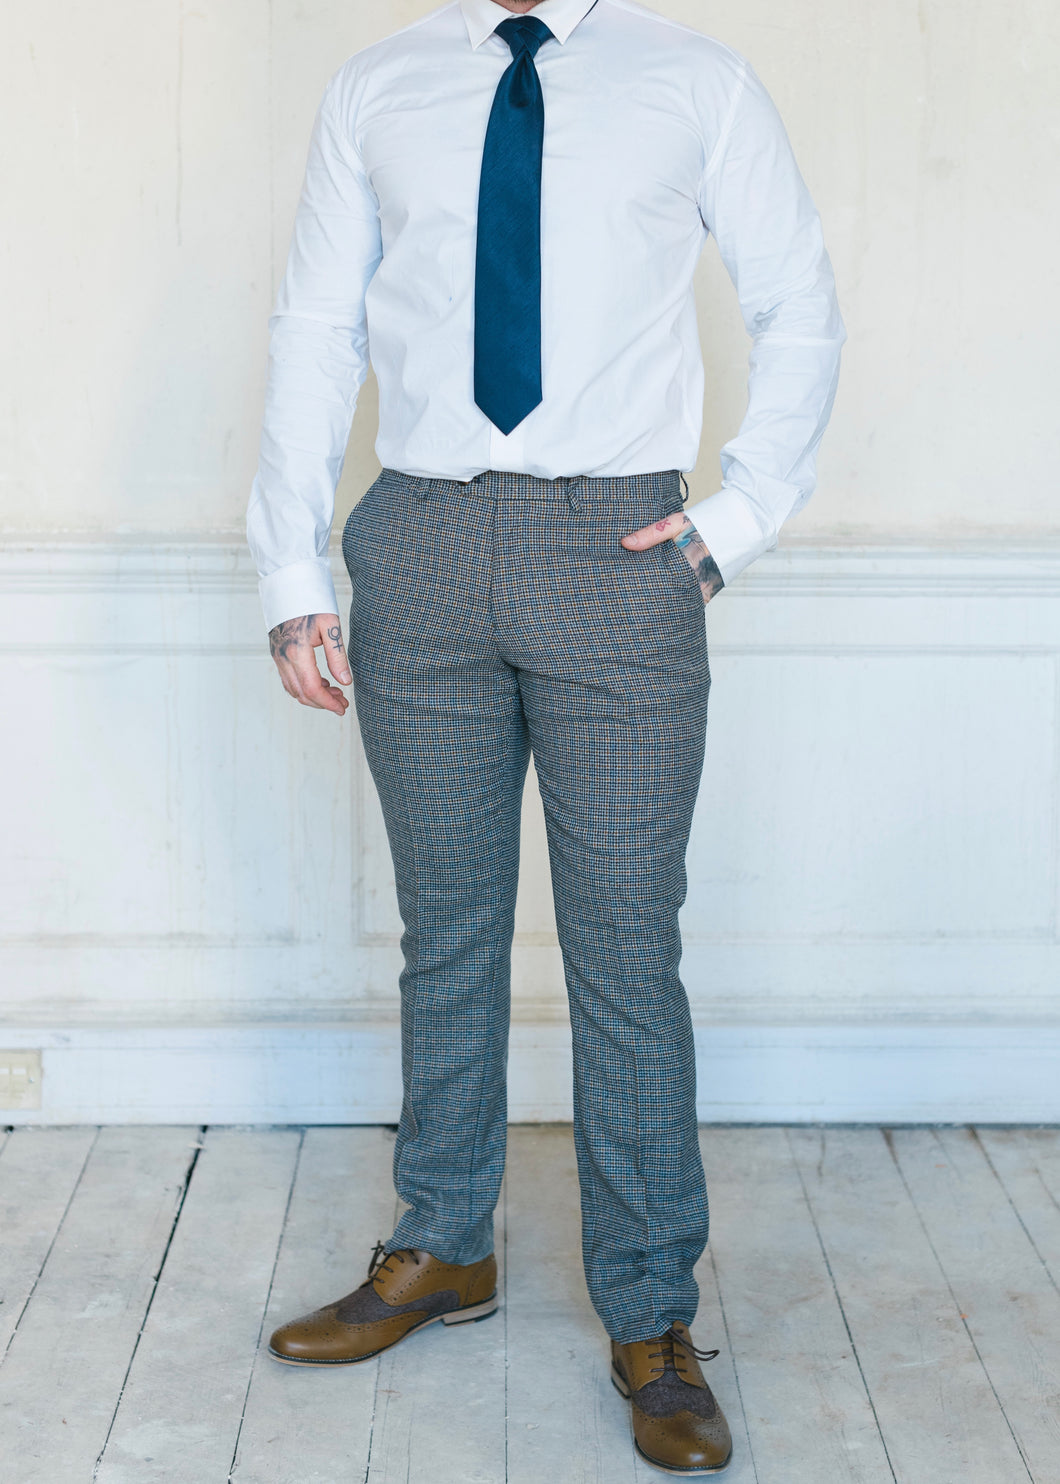 Marc Darcy Hardwick Checked Trousers. Great for business attire or a formal occasion such as a wedding